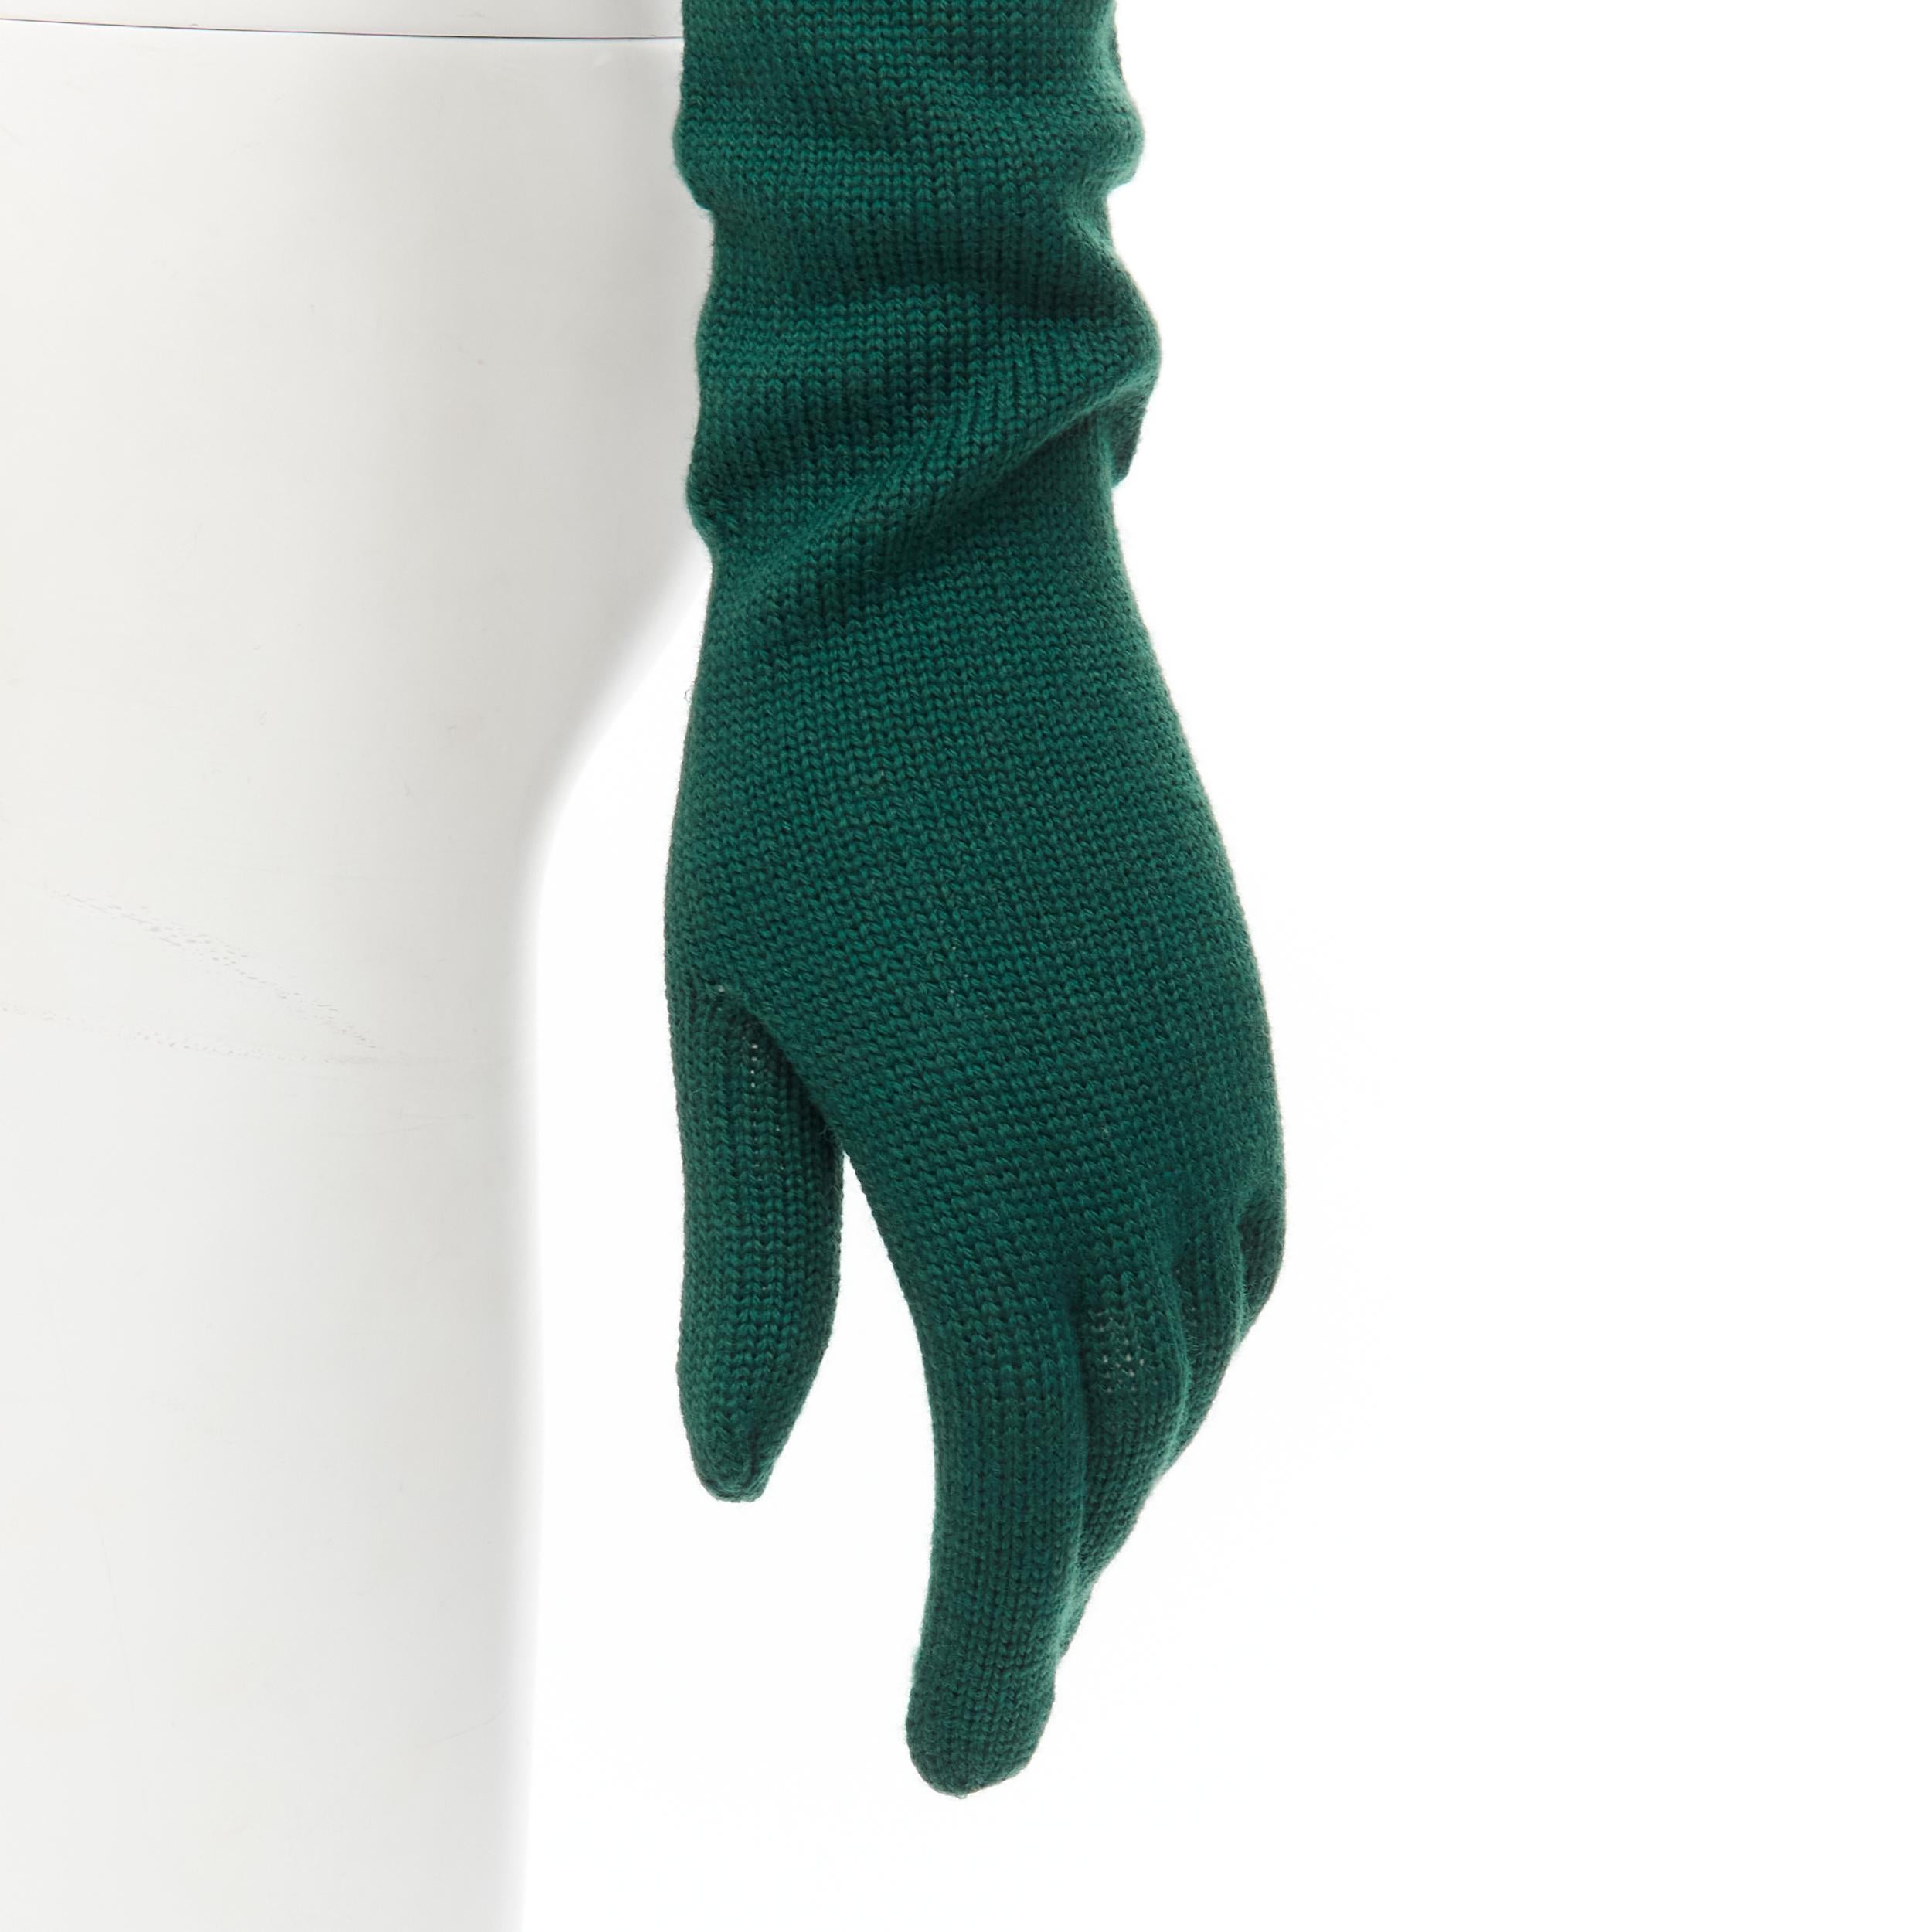 COMME DES GARCONS 1996 Vintage Runway green wool full opera gloves rare 
Reference: CRTI/A00718 
Brand: Comme Des Garcons 
Designer: Rei Kawakubo 
Collection: 1996 Runway 
Material: Wool 
Color: Green 
Pattern: Solid 
Extra Detail: Wool knit. Curled